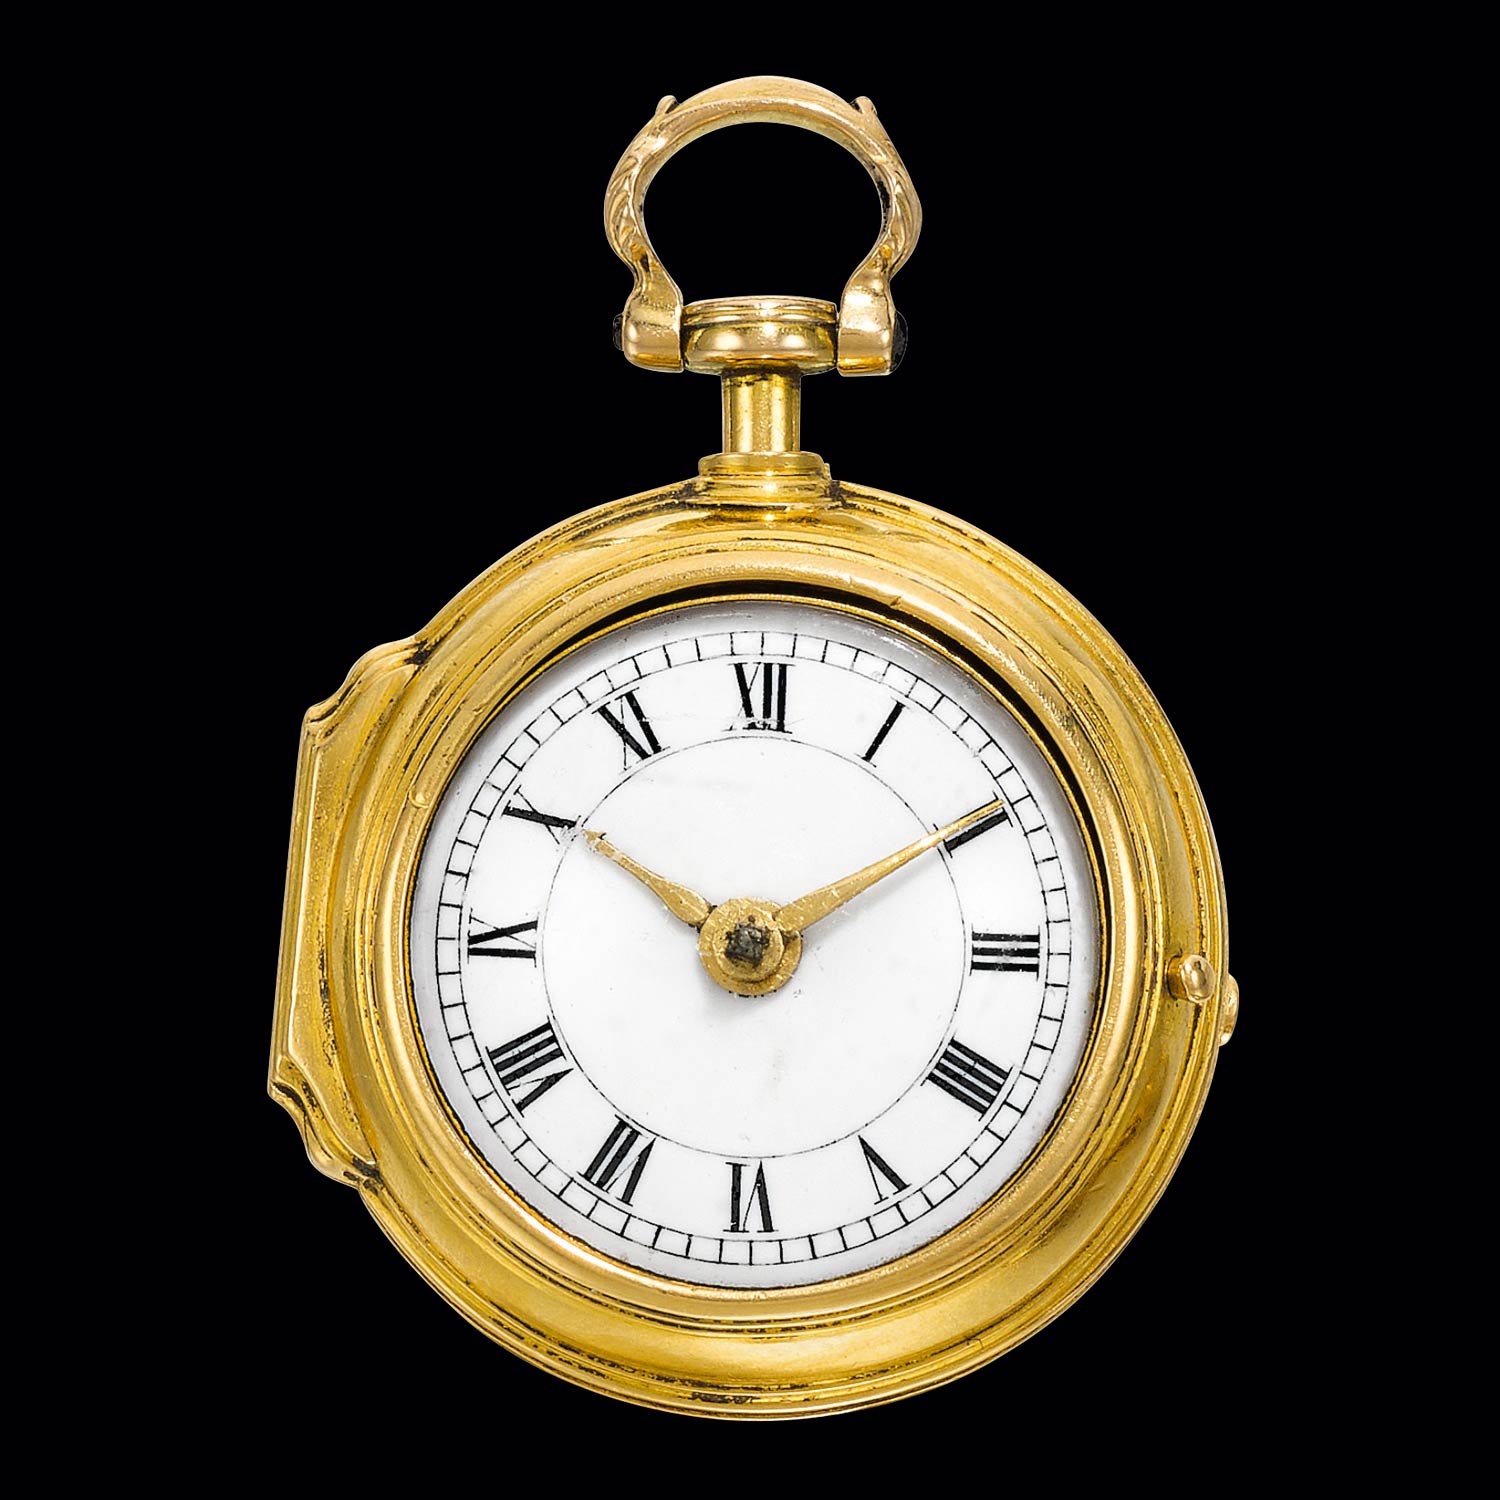 Lot 22: Walter Stacy Ward, London AN EXTREMELY SMALL AND RARE GOLD PAIR-CASED VERGE WATCH CIRCA 1775 NO 5